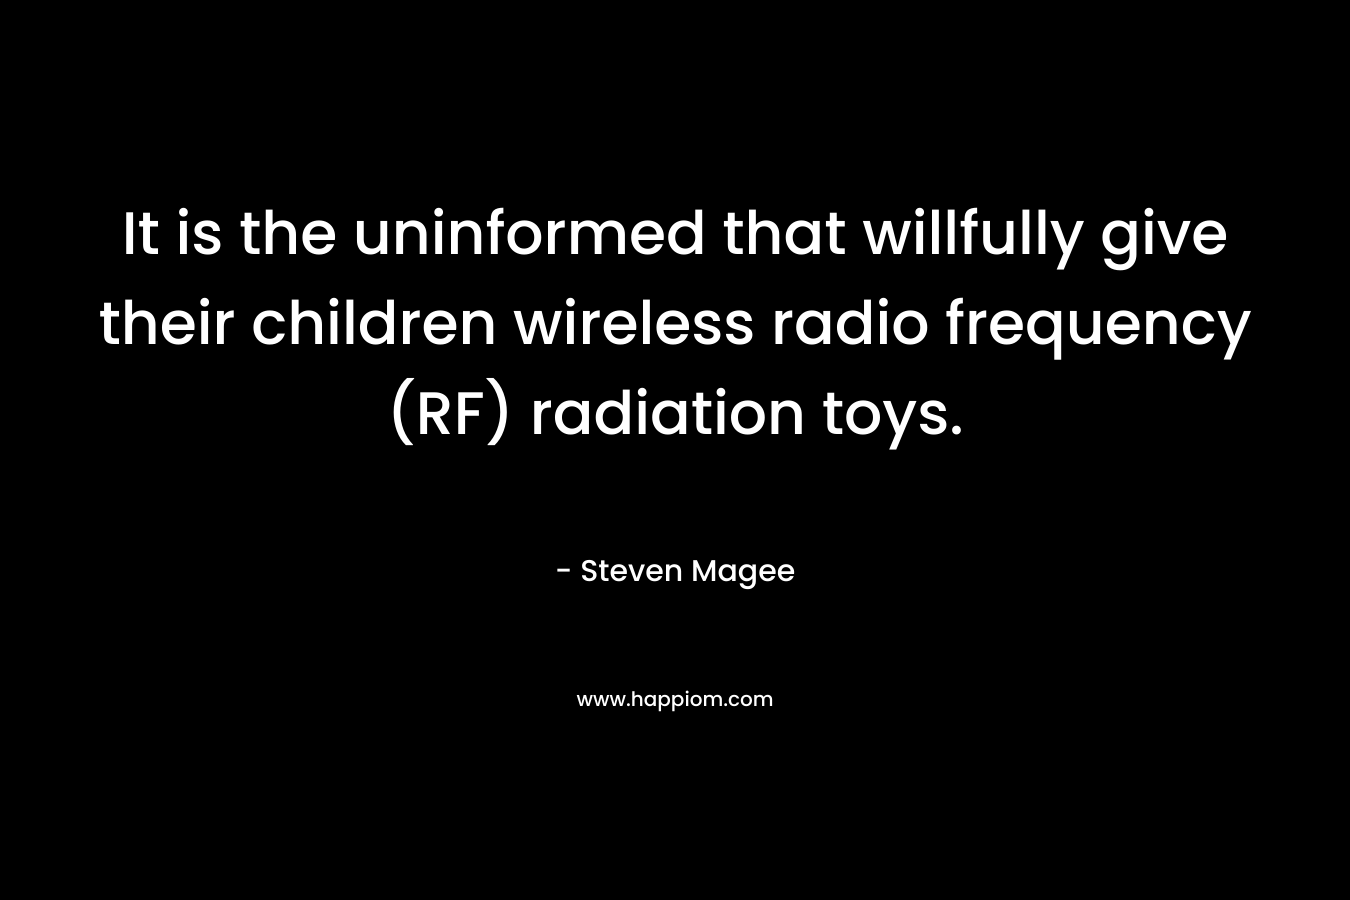 It is the uninformed that willfully give their children wireless radio frequency (RF) radiation toys. – Steven Magee